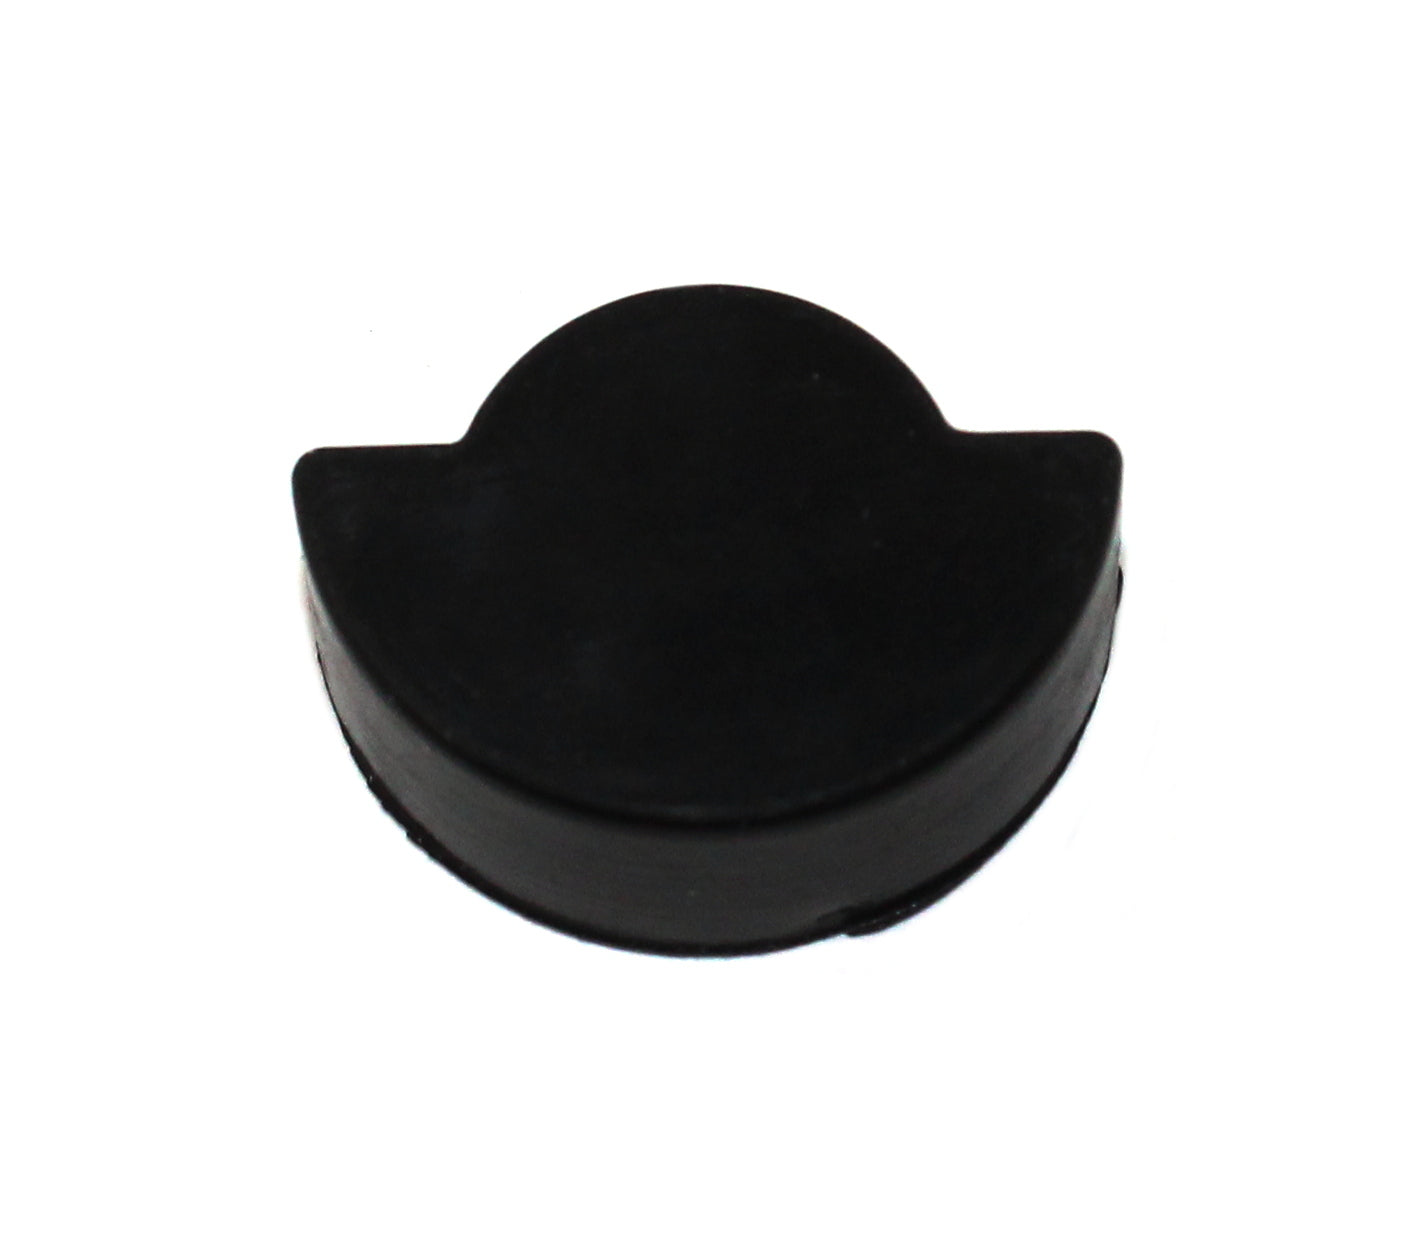 Polymer Recoil Buffer Pad compatible with SKS Rifle Impact Shock Absorber